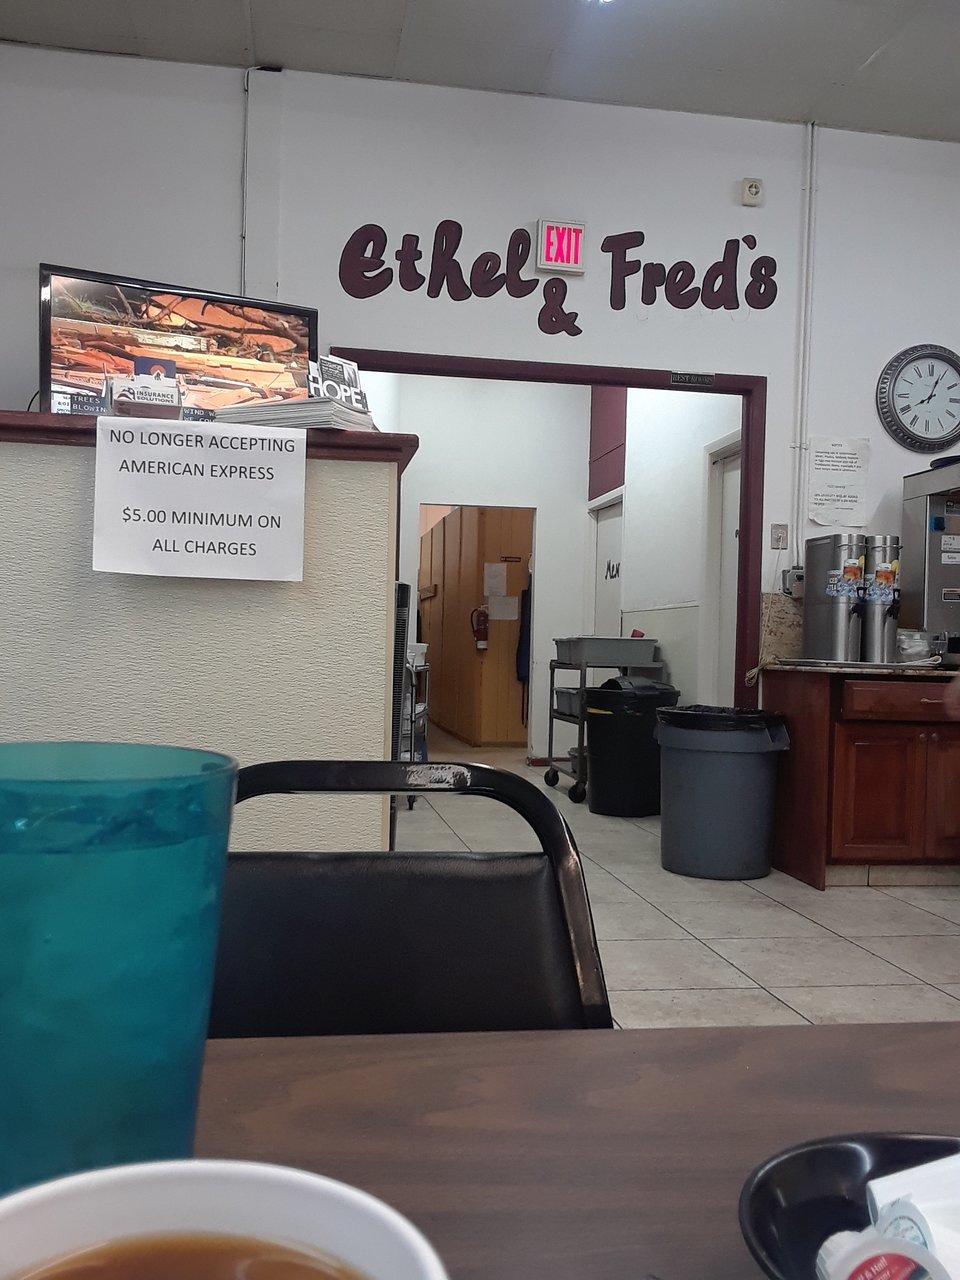 Ethel & Fred's